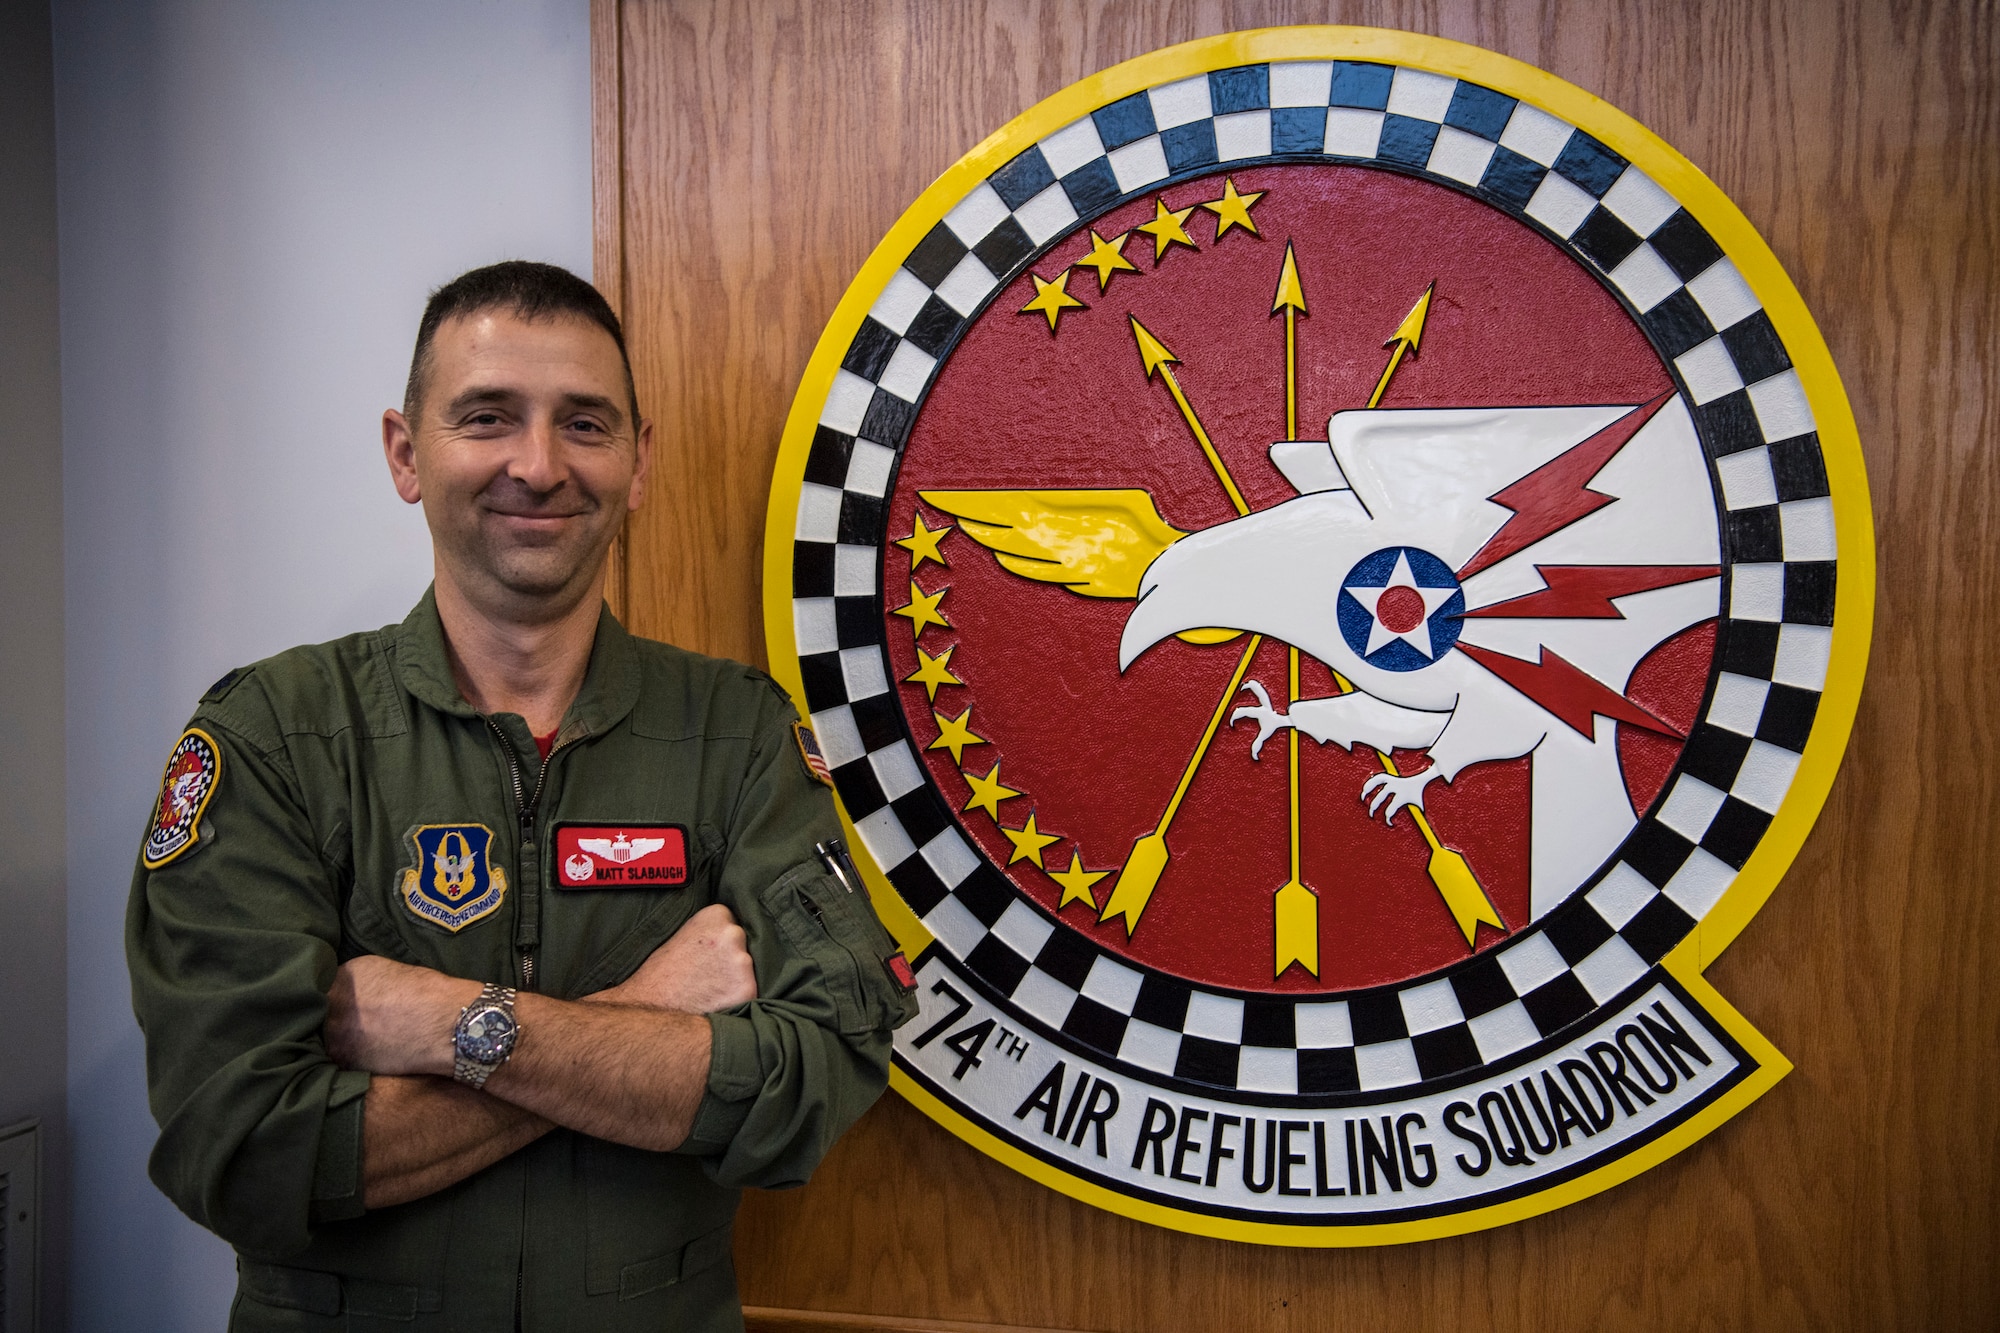 Lt. Col. Matt Slabaugh, 74th Air Refueling Squadron Commander, poses for a photo in front of the 74th ARS seal at Grissom Air Reserve Base, Ind., Nov. 14, 2018. Slabaugh recently took command of the 74th after the retirement of Lt. Col. Brian Burr. (U.S. Air Force photo / Senior Airman Harrison Withrow)